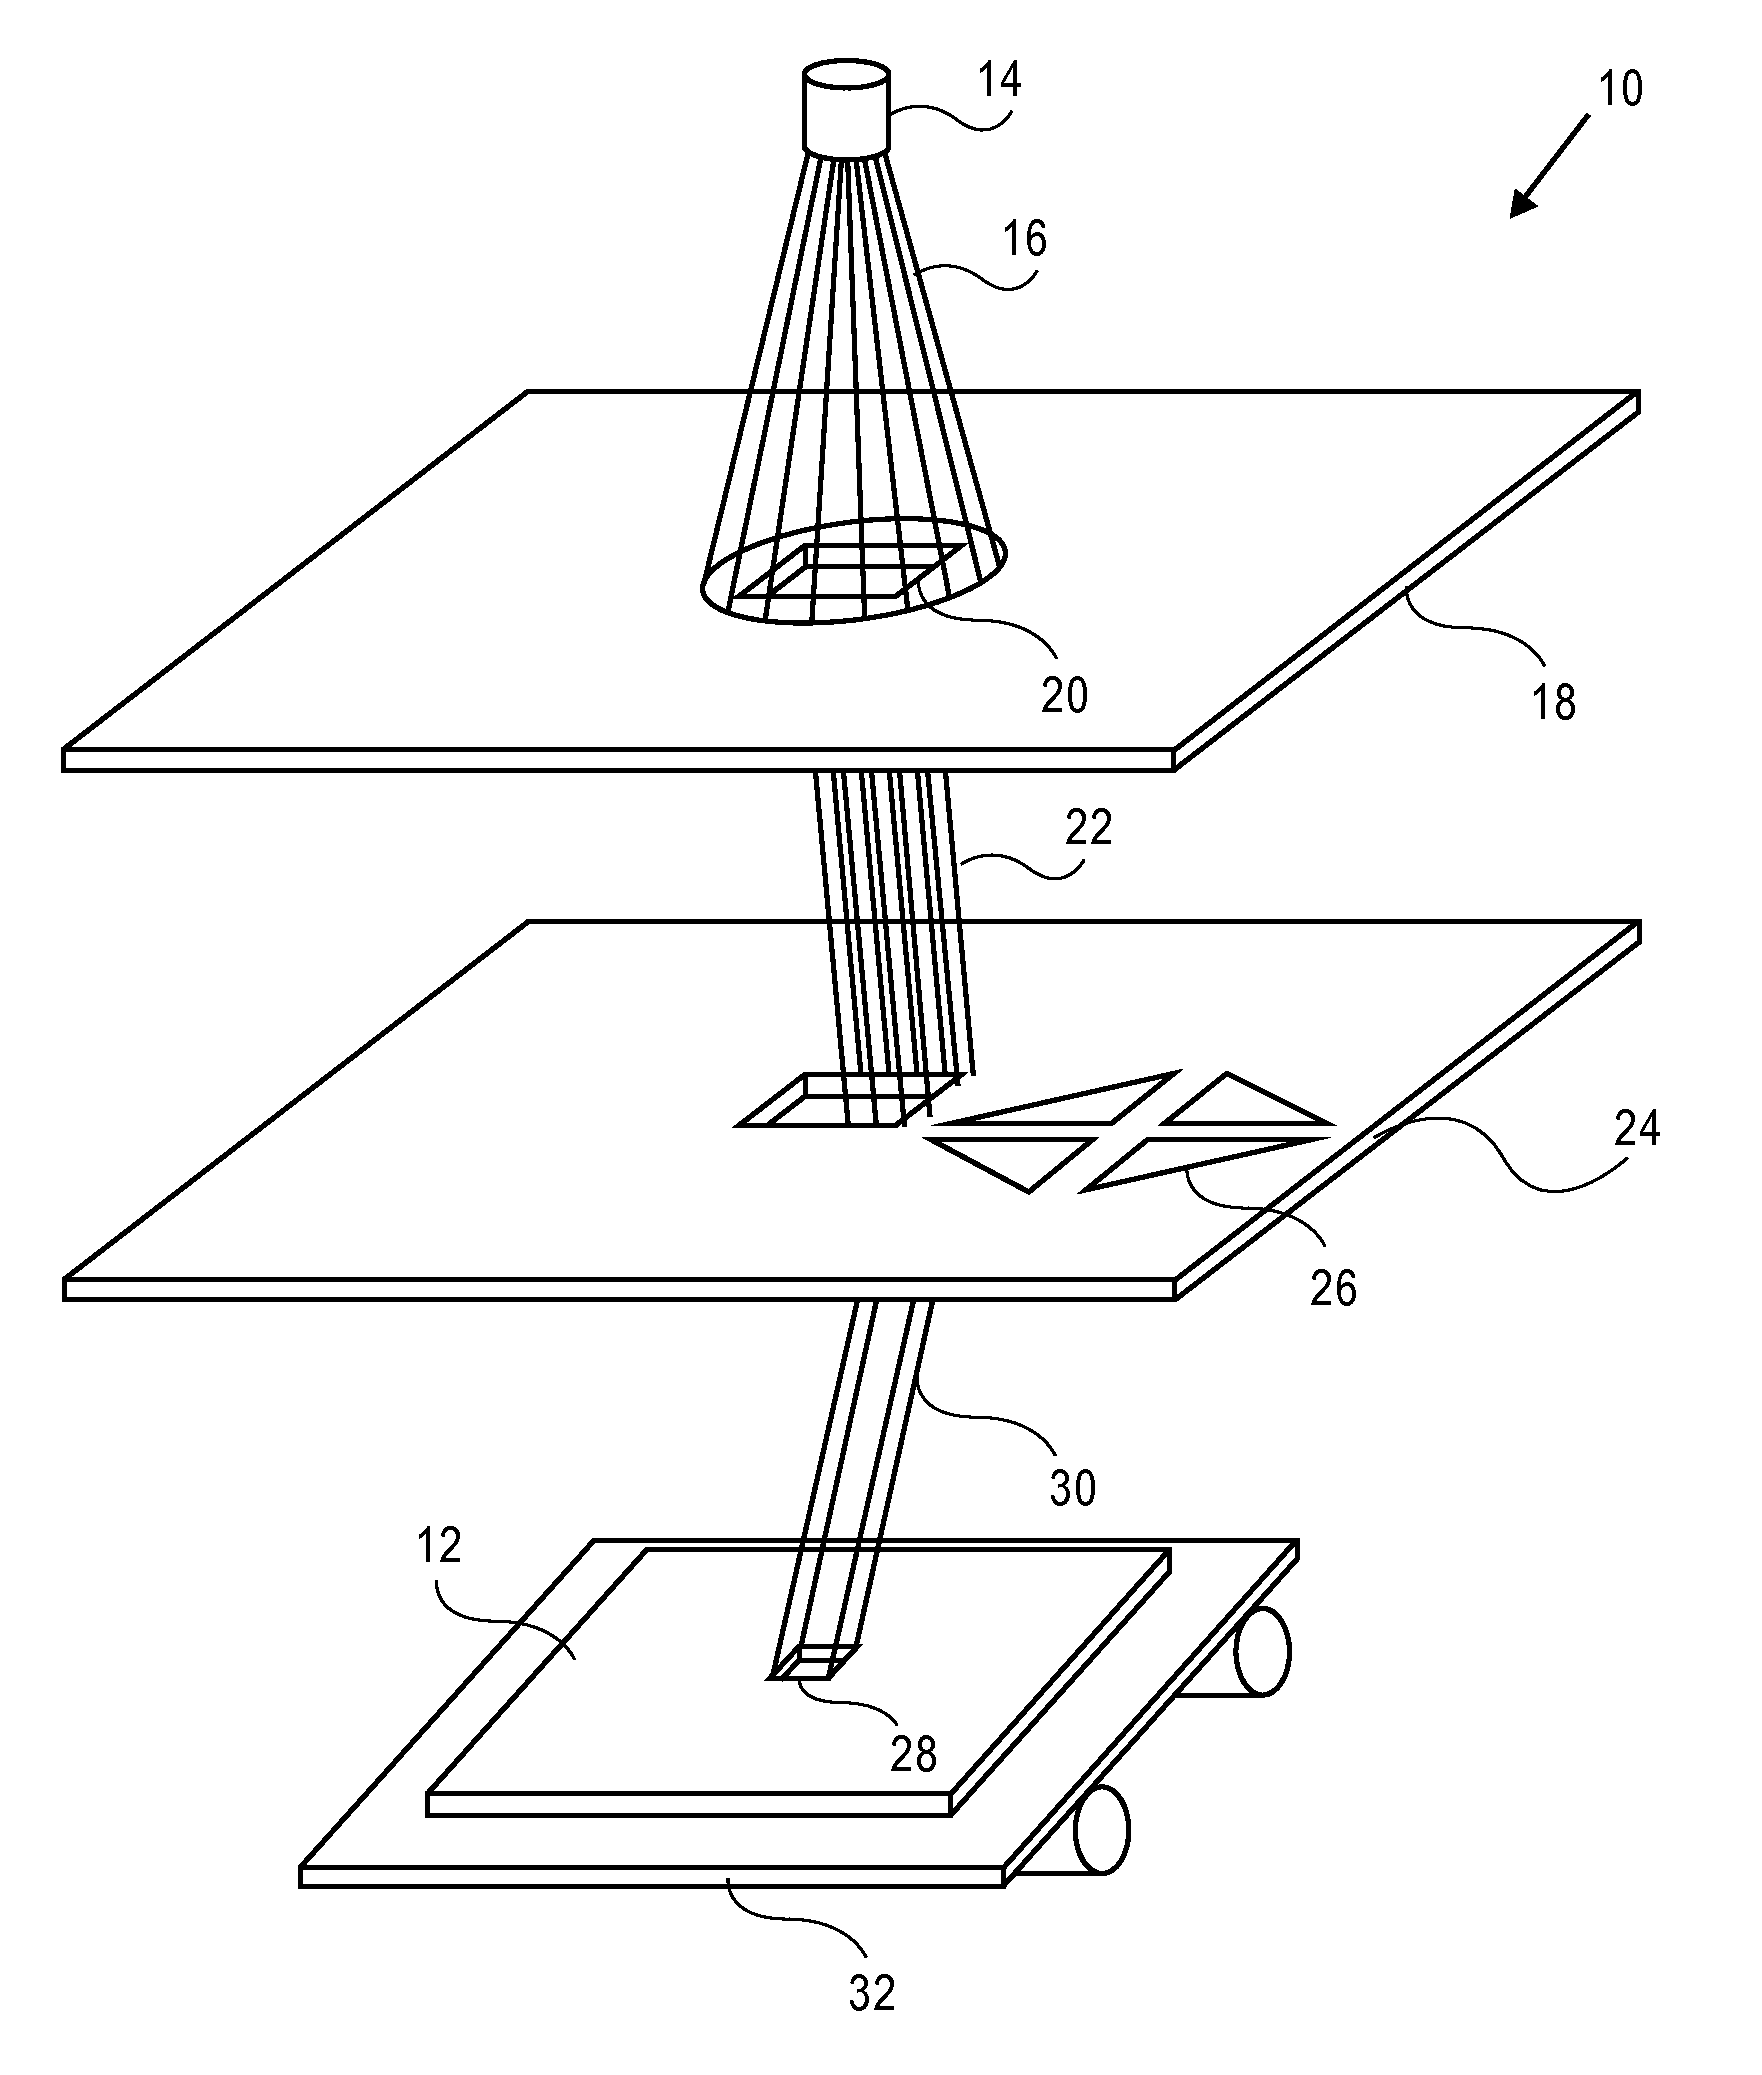 Method and System for Design of a Reticle to be Manufactured Using Variable Shaped Beam Lithography